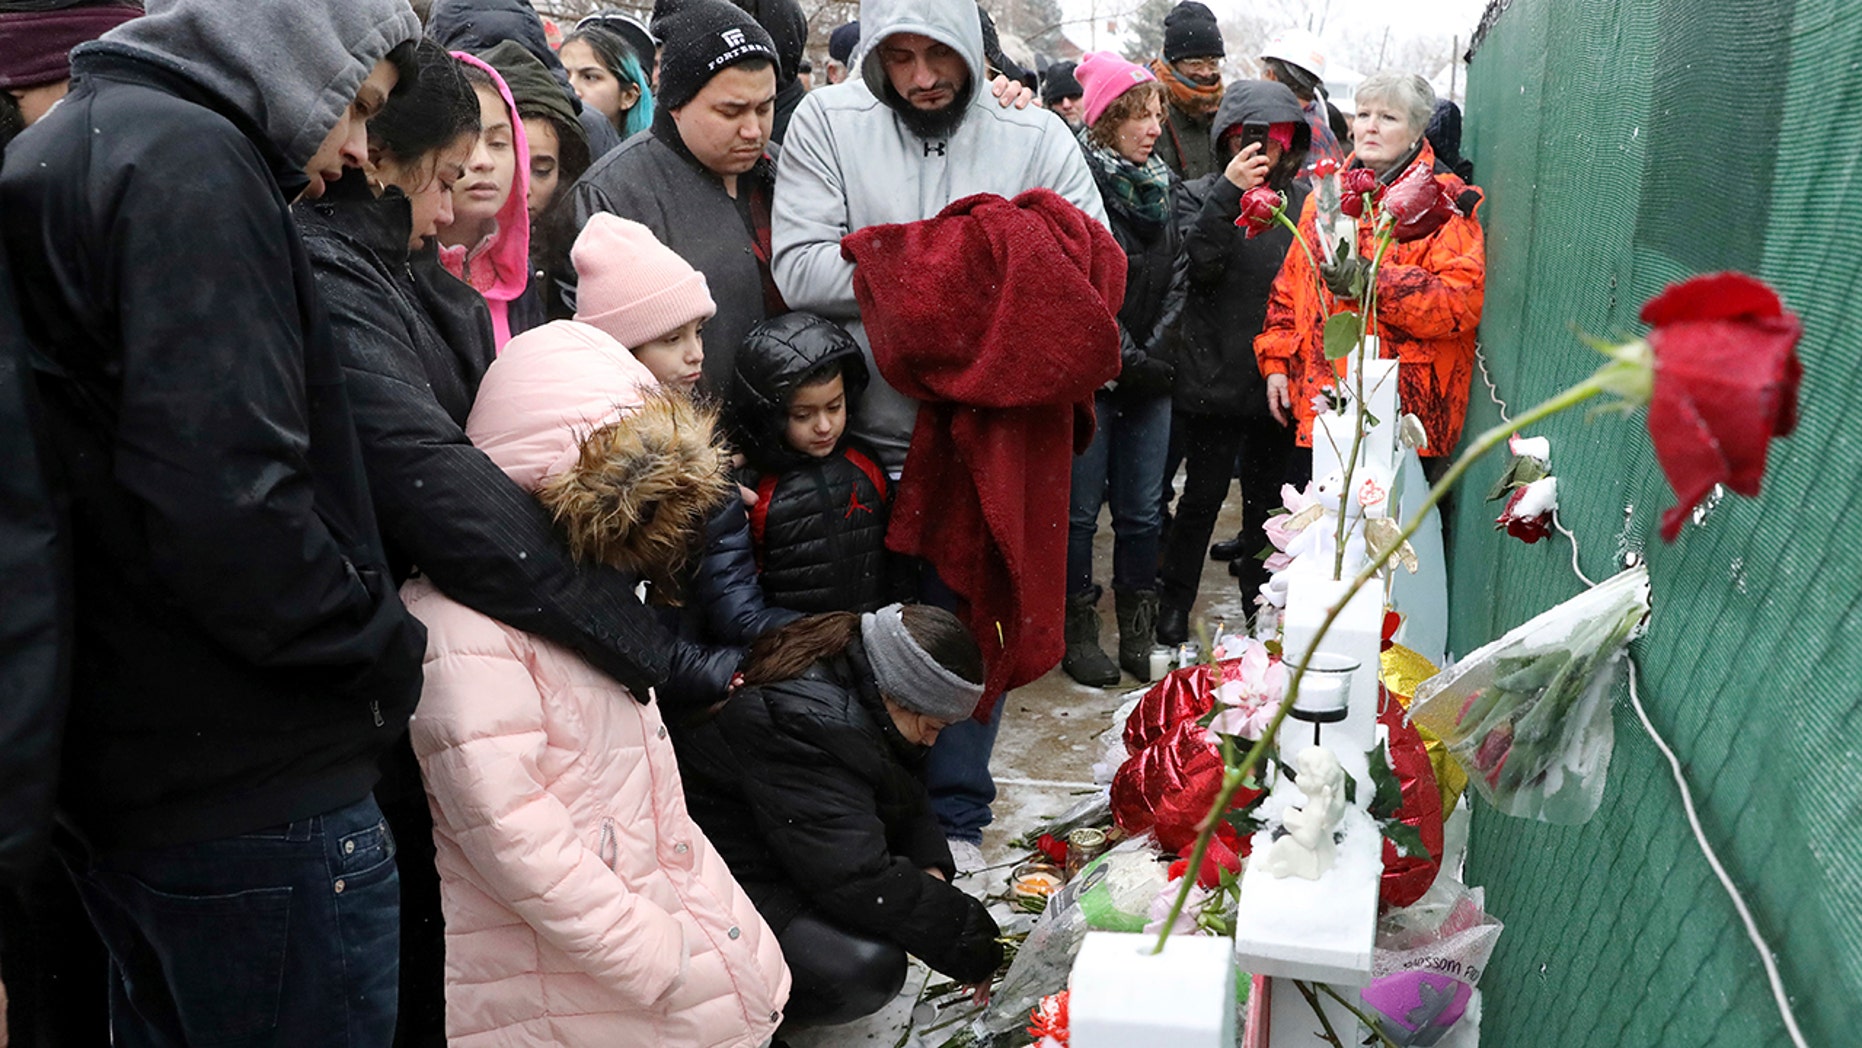 A Victim's family, Vicente Juarez, prayed Sunday at a makeshift memorial in Aurora, Illinois, near the manufacturing company Henry Pratt, where several people were killed on Friday. (AP Photo / Nam Y. Huh)